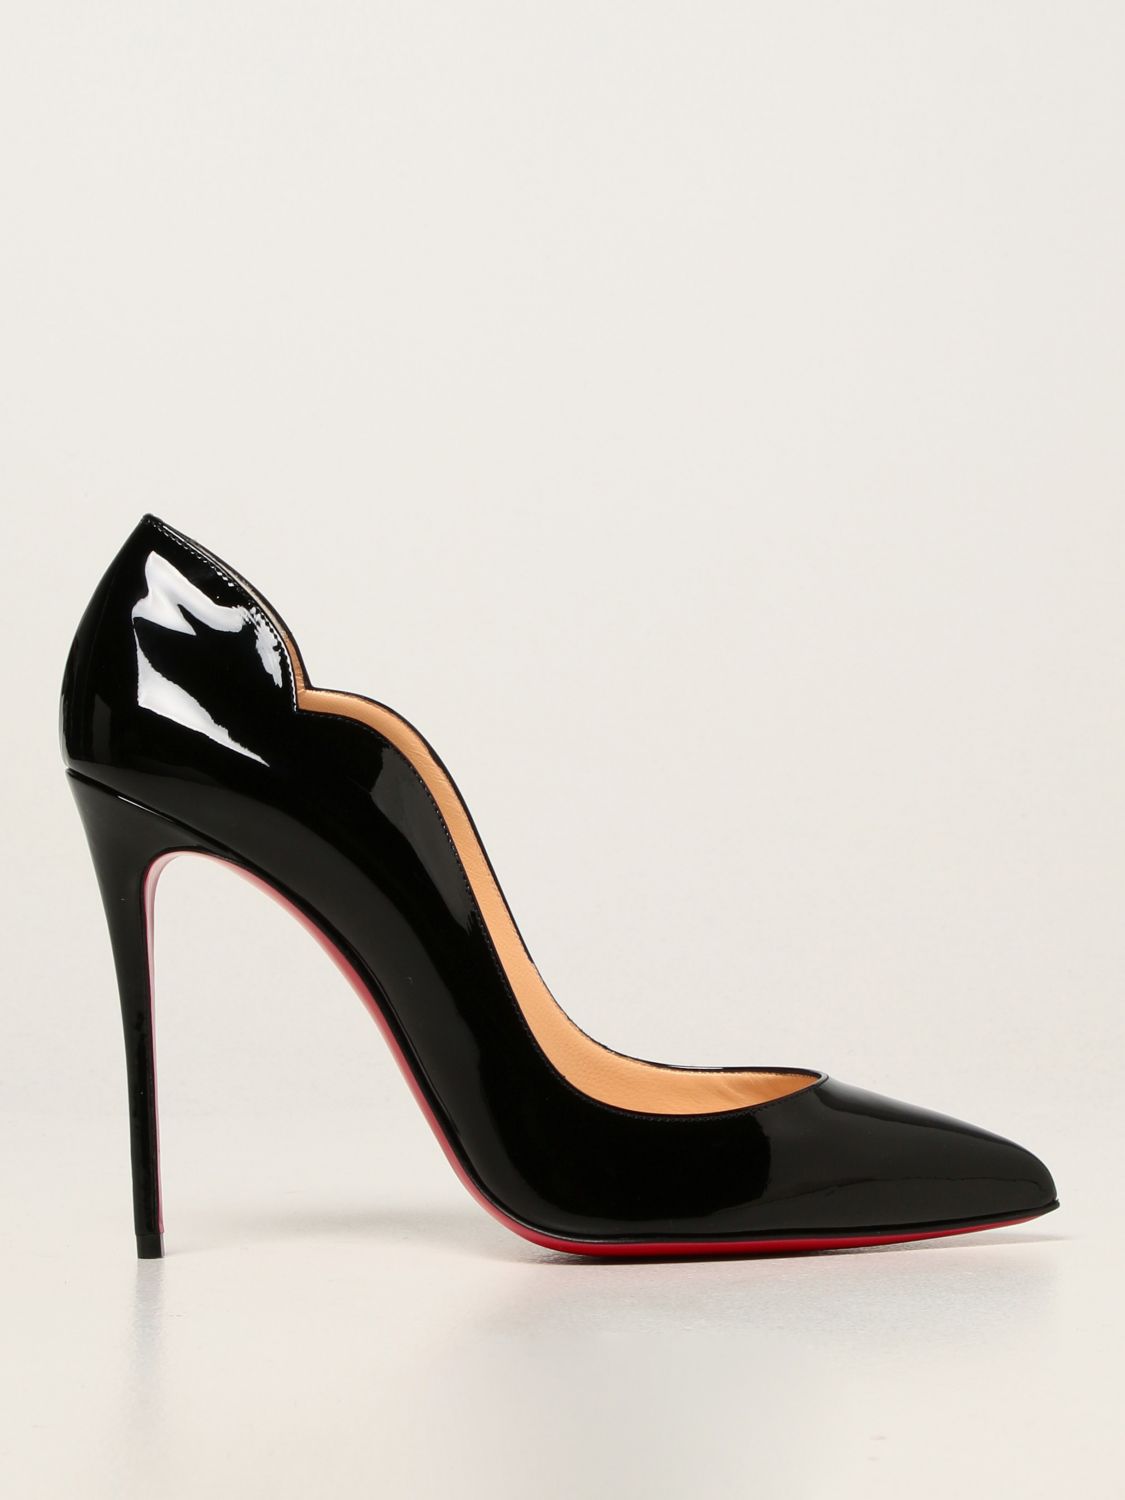 Chaussures femme Christian Louboutin